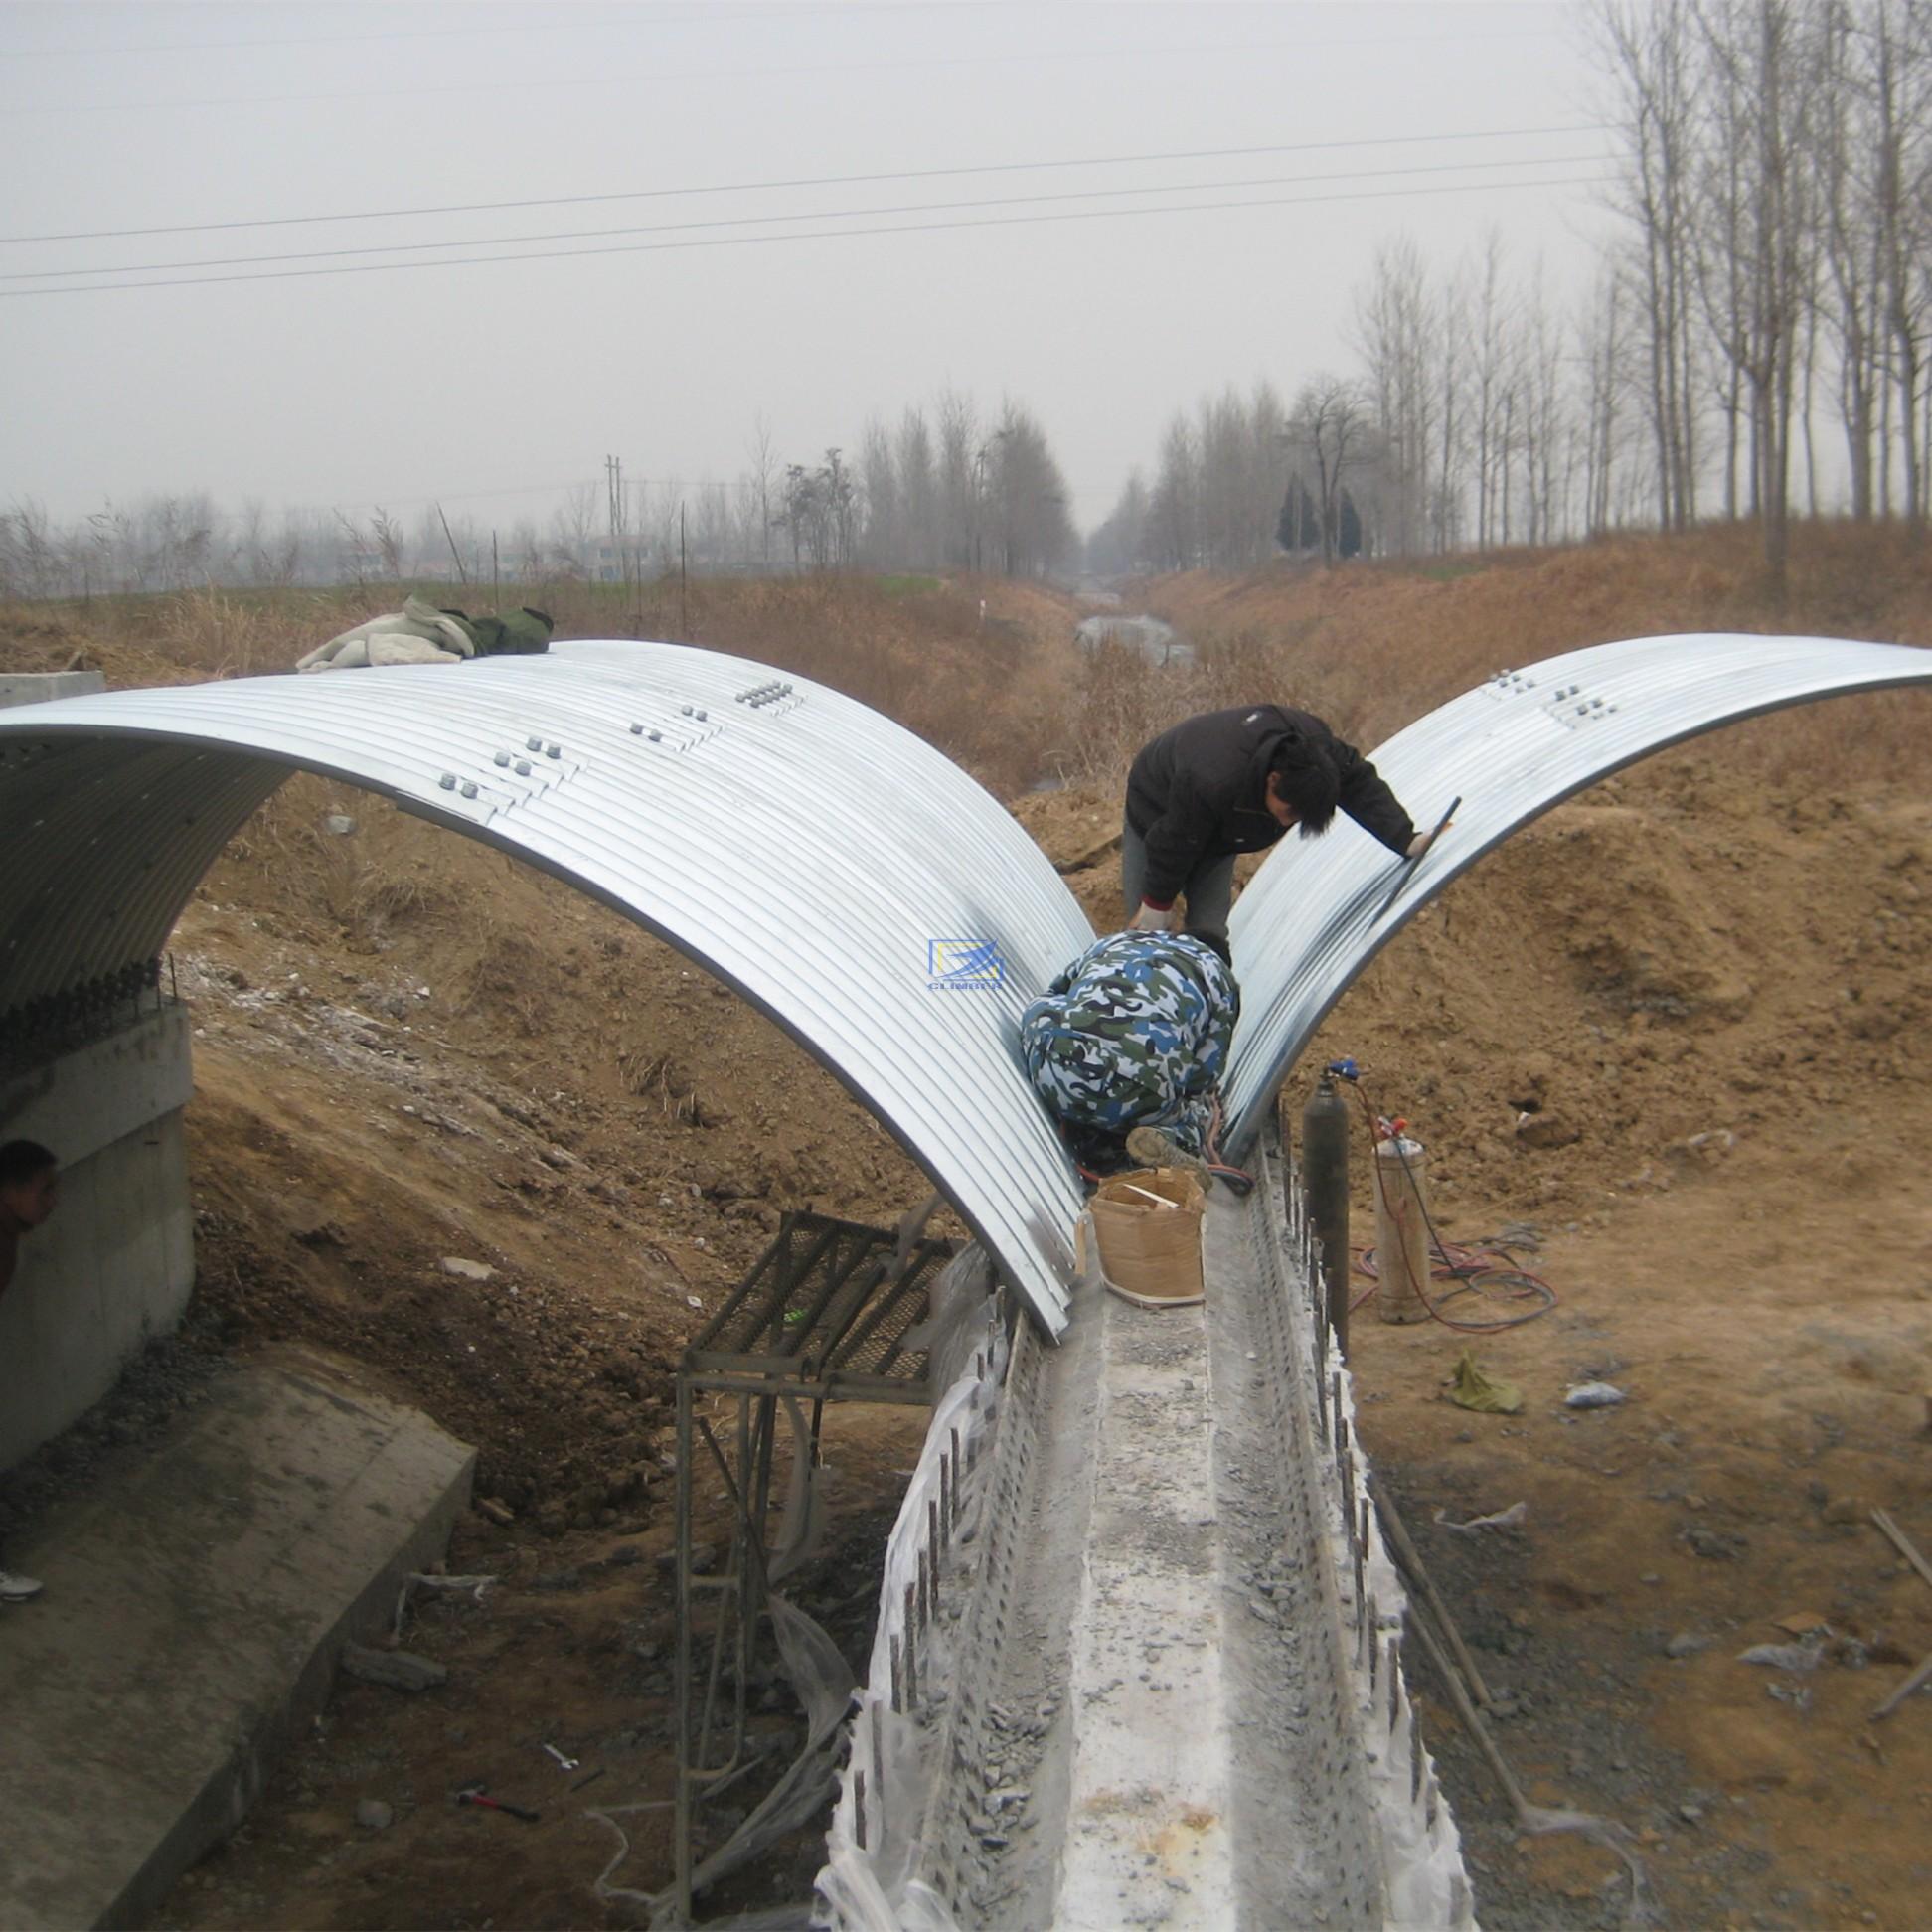 hot galvanzied corrugated metal culvert pipe with deep corrugation